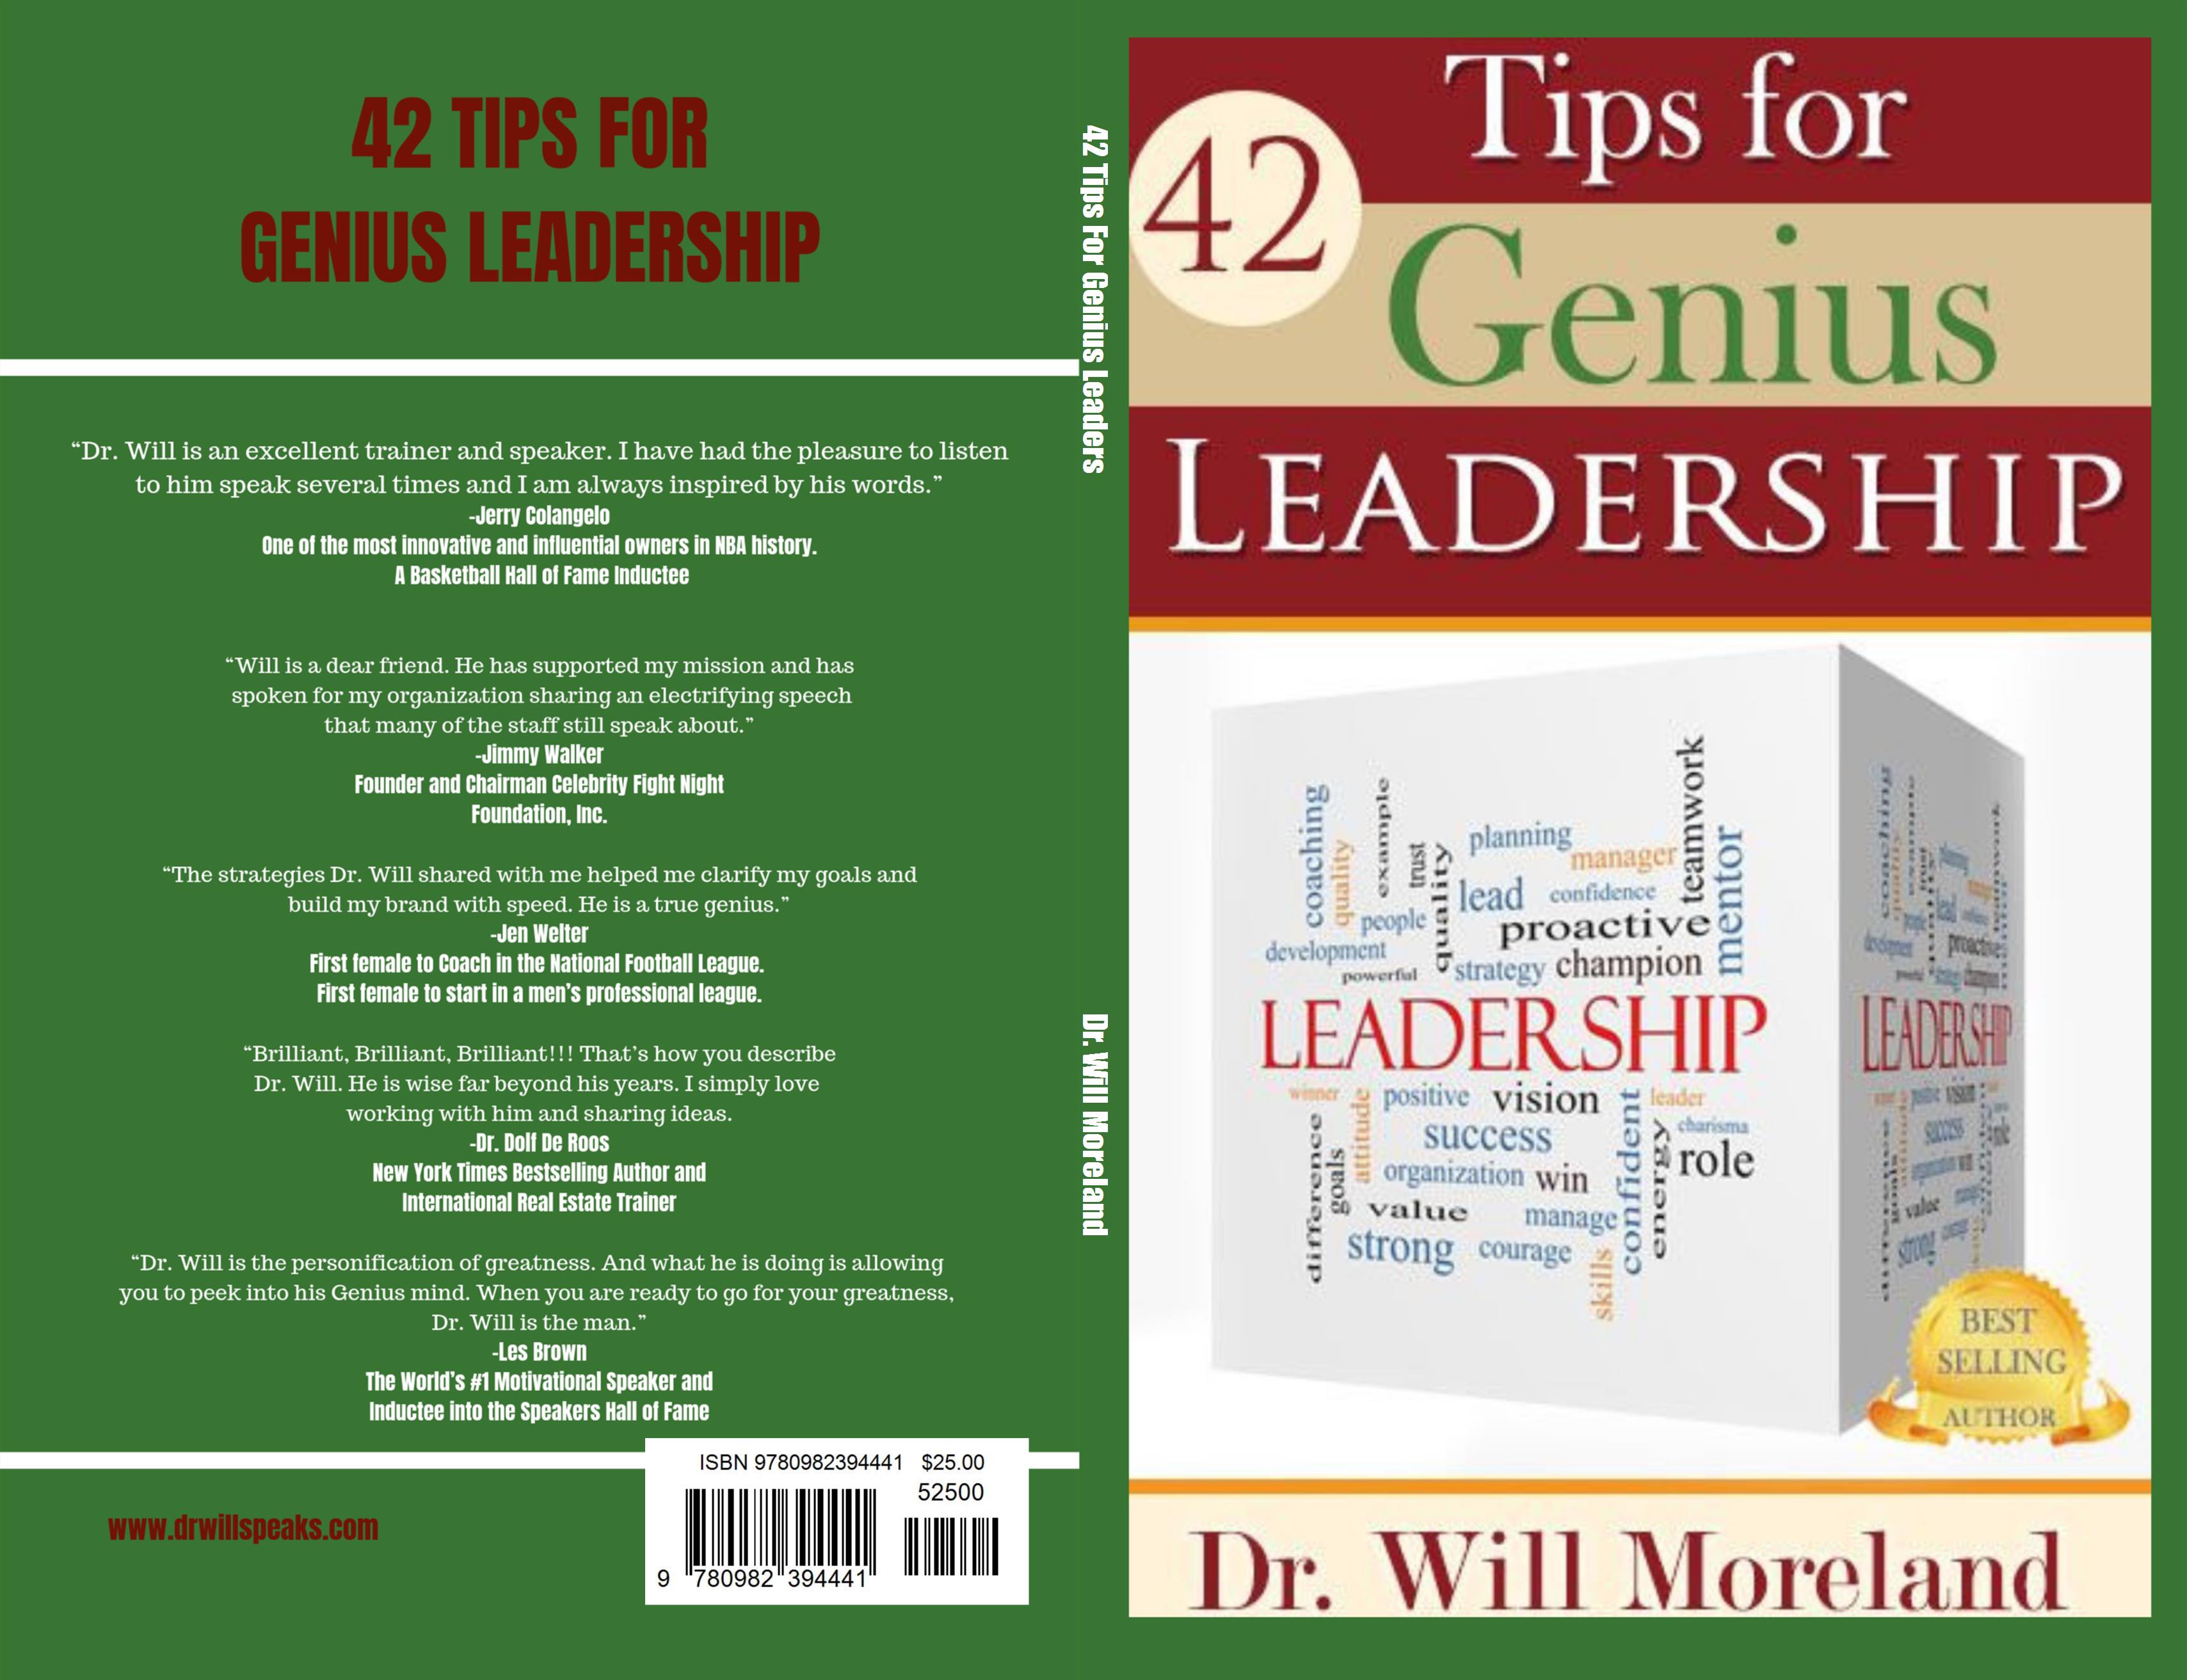 42 Tips For Genius Leaders  cover image